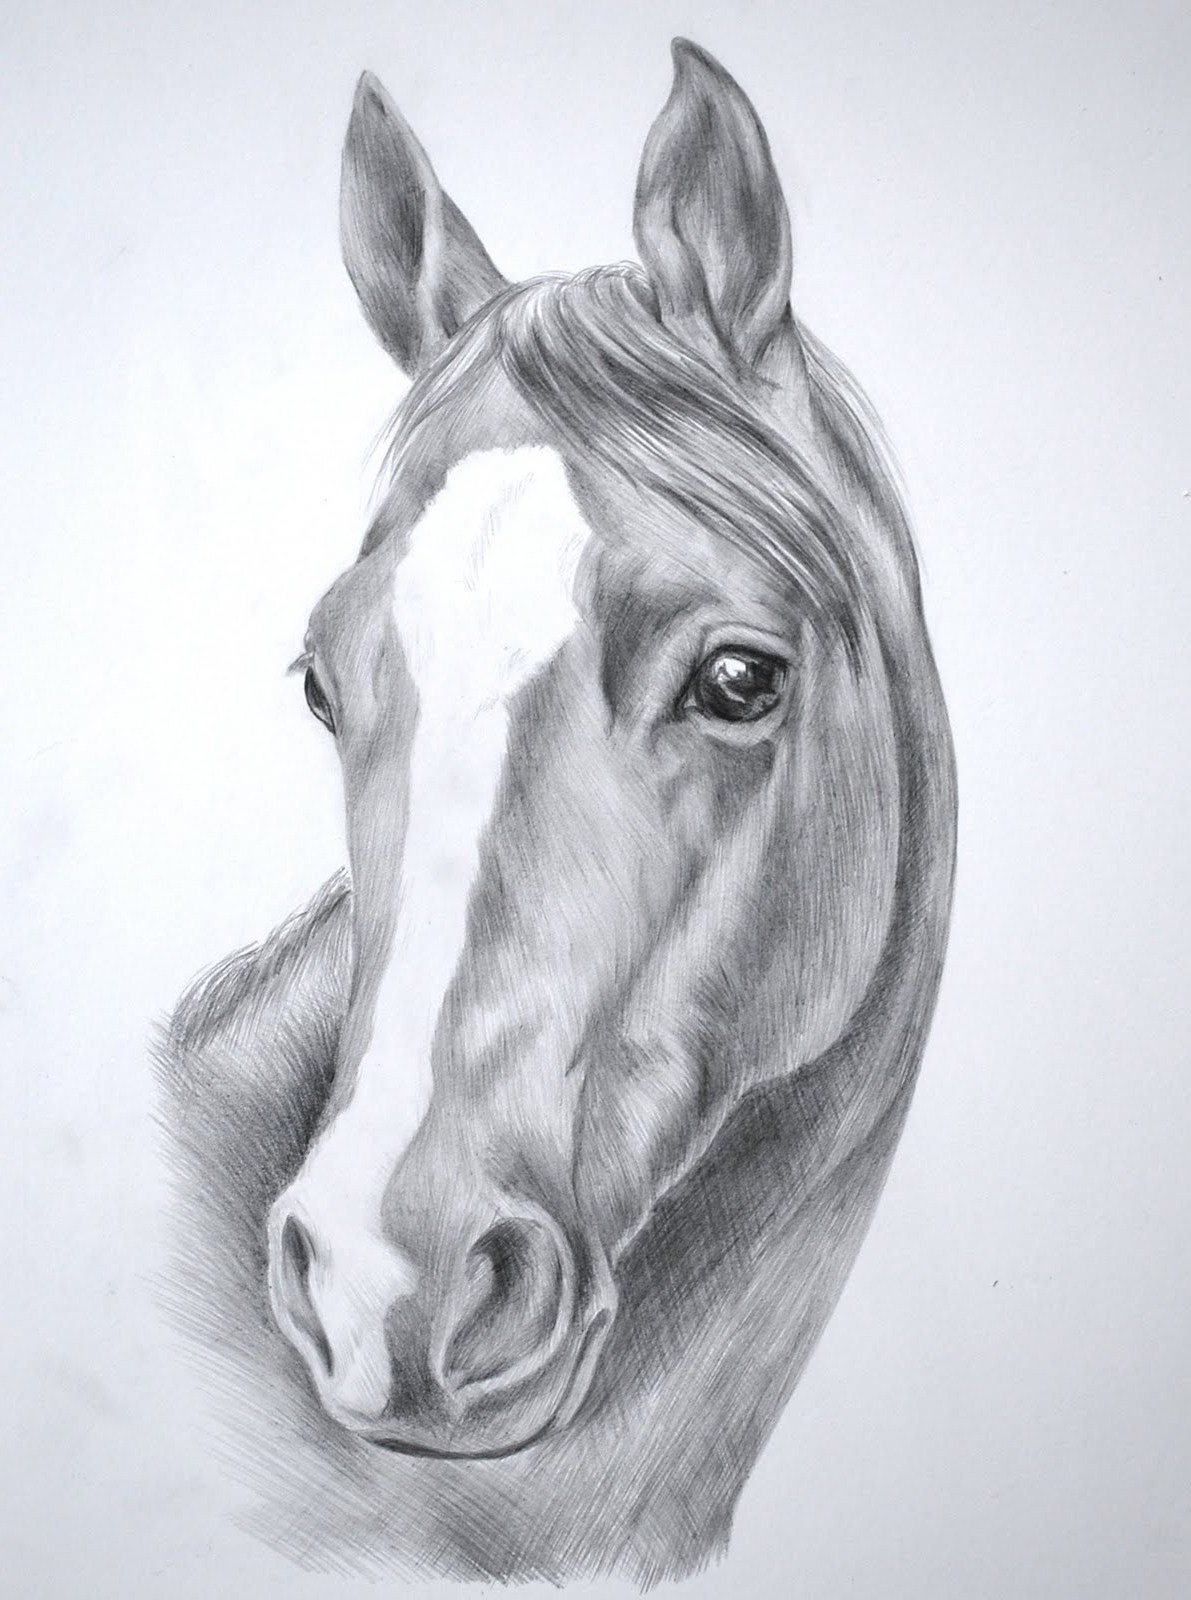 Simple Sketch Horse Head Drawing with Realistic